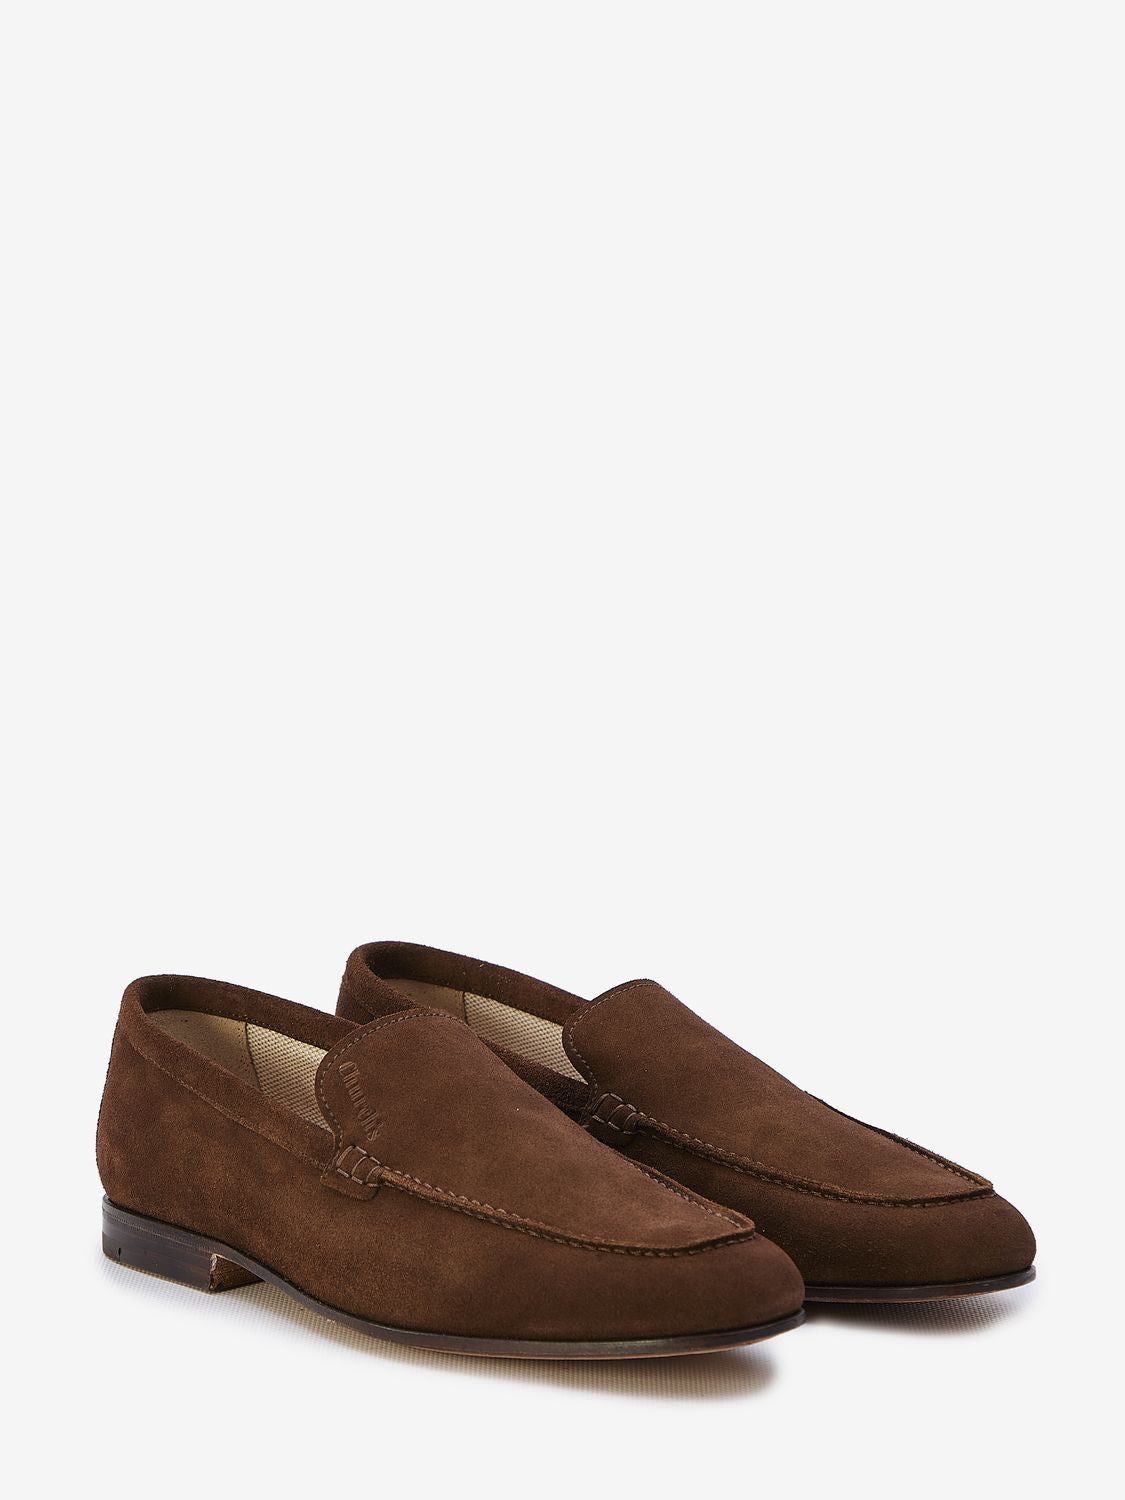 CHURCH'S Soft Brown Suede Loafers for Men